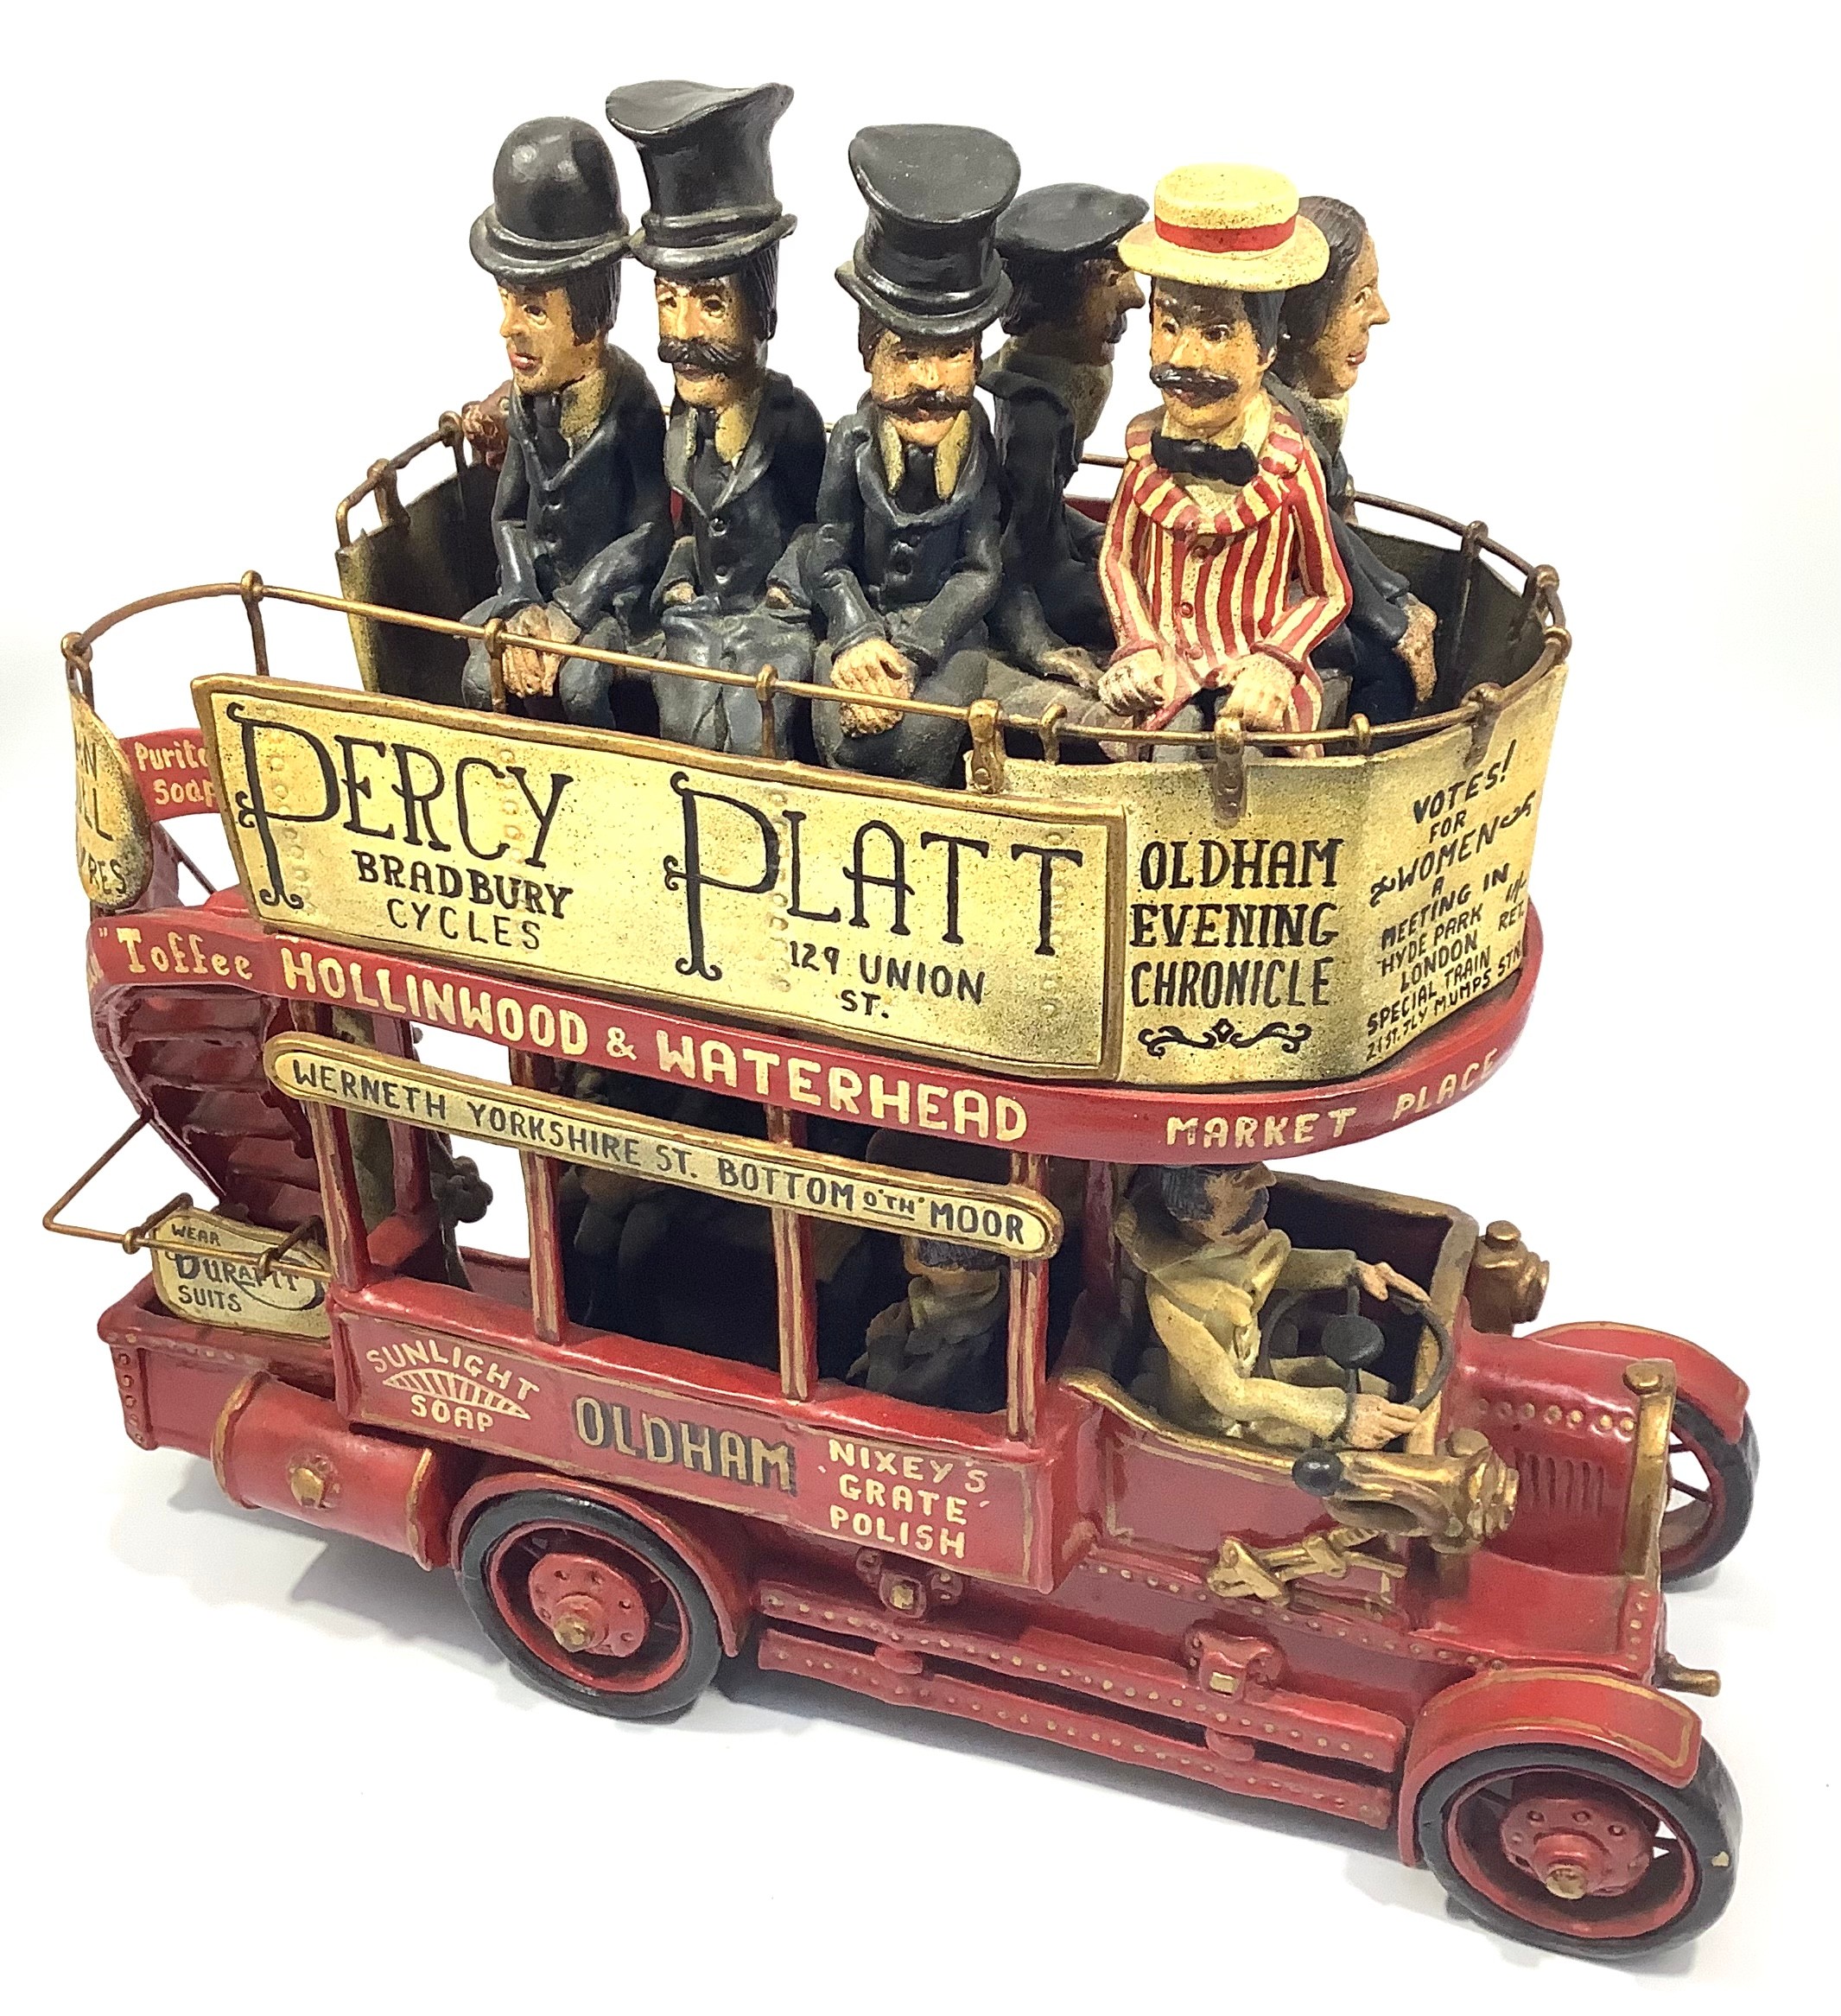 A novelty model of an open-topped double decker bus with seated figures in Victorian dress top and